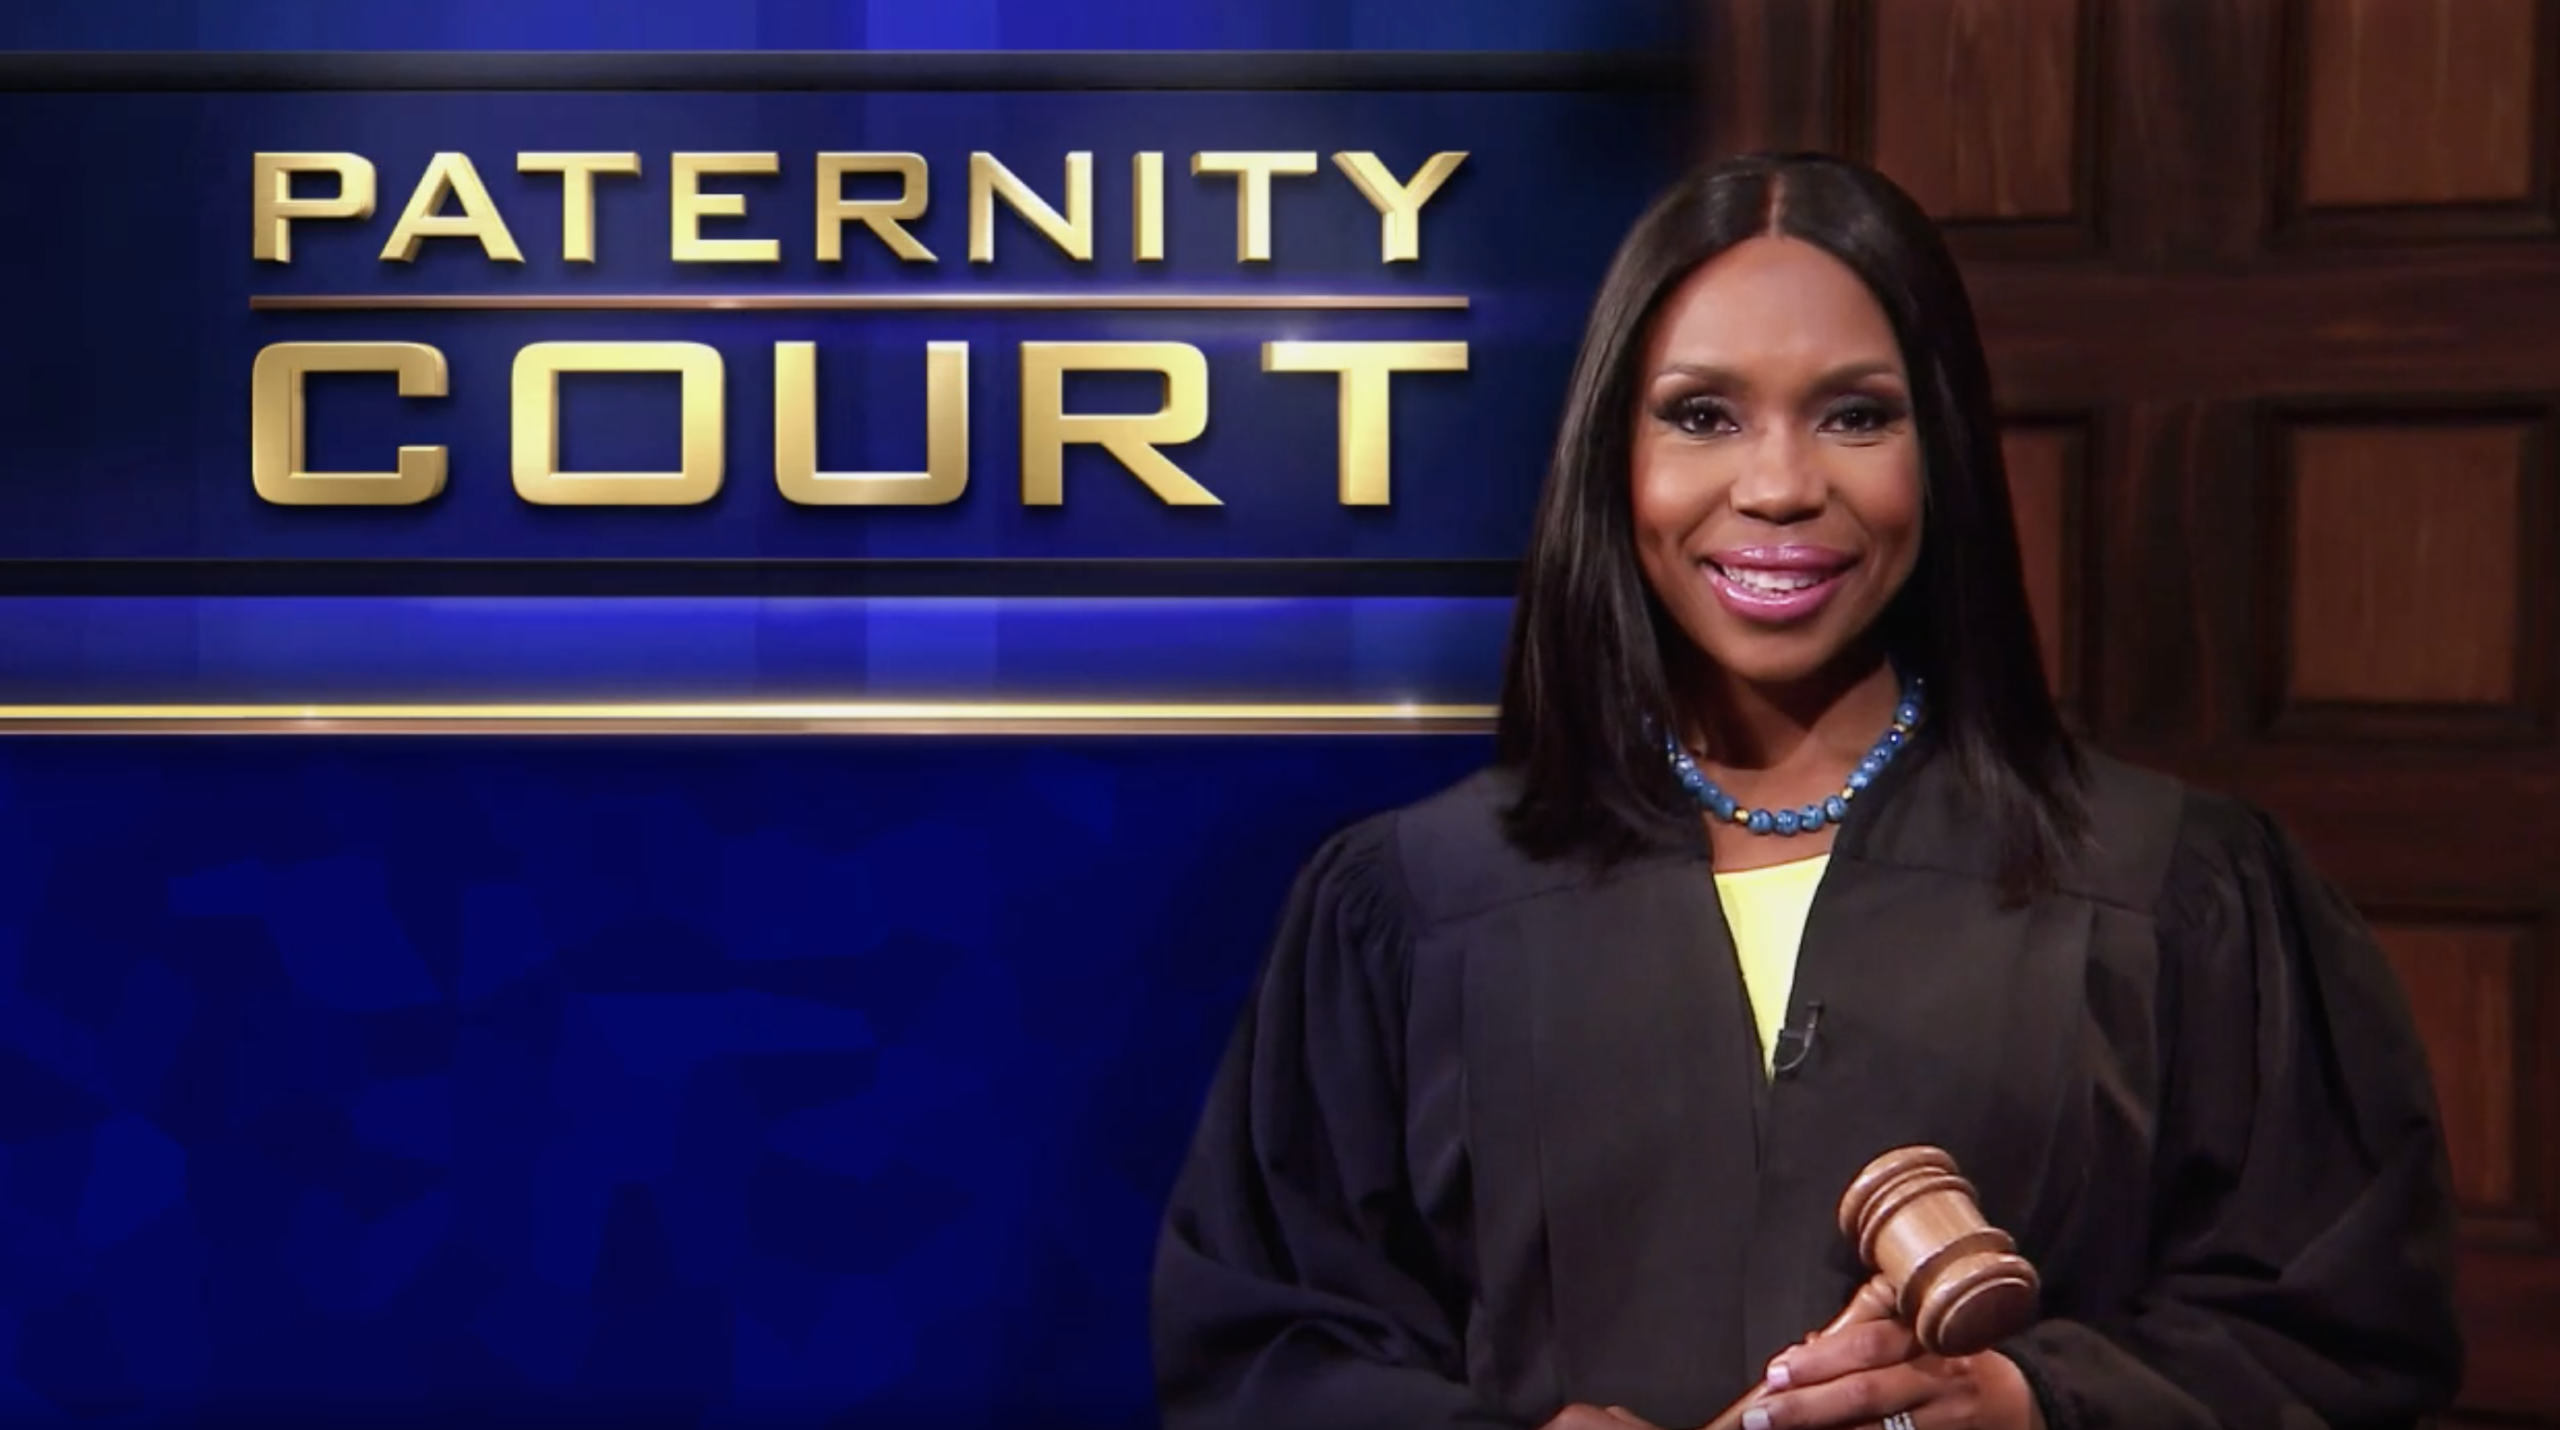 Is Paternity Court real? Answering the most asked question about the show